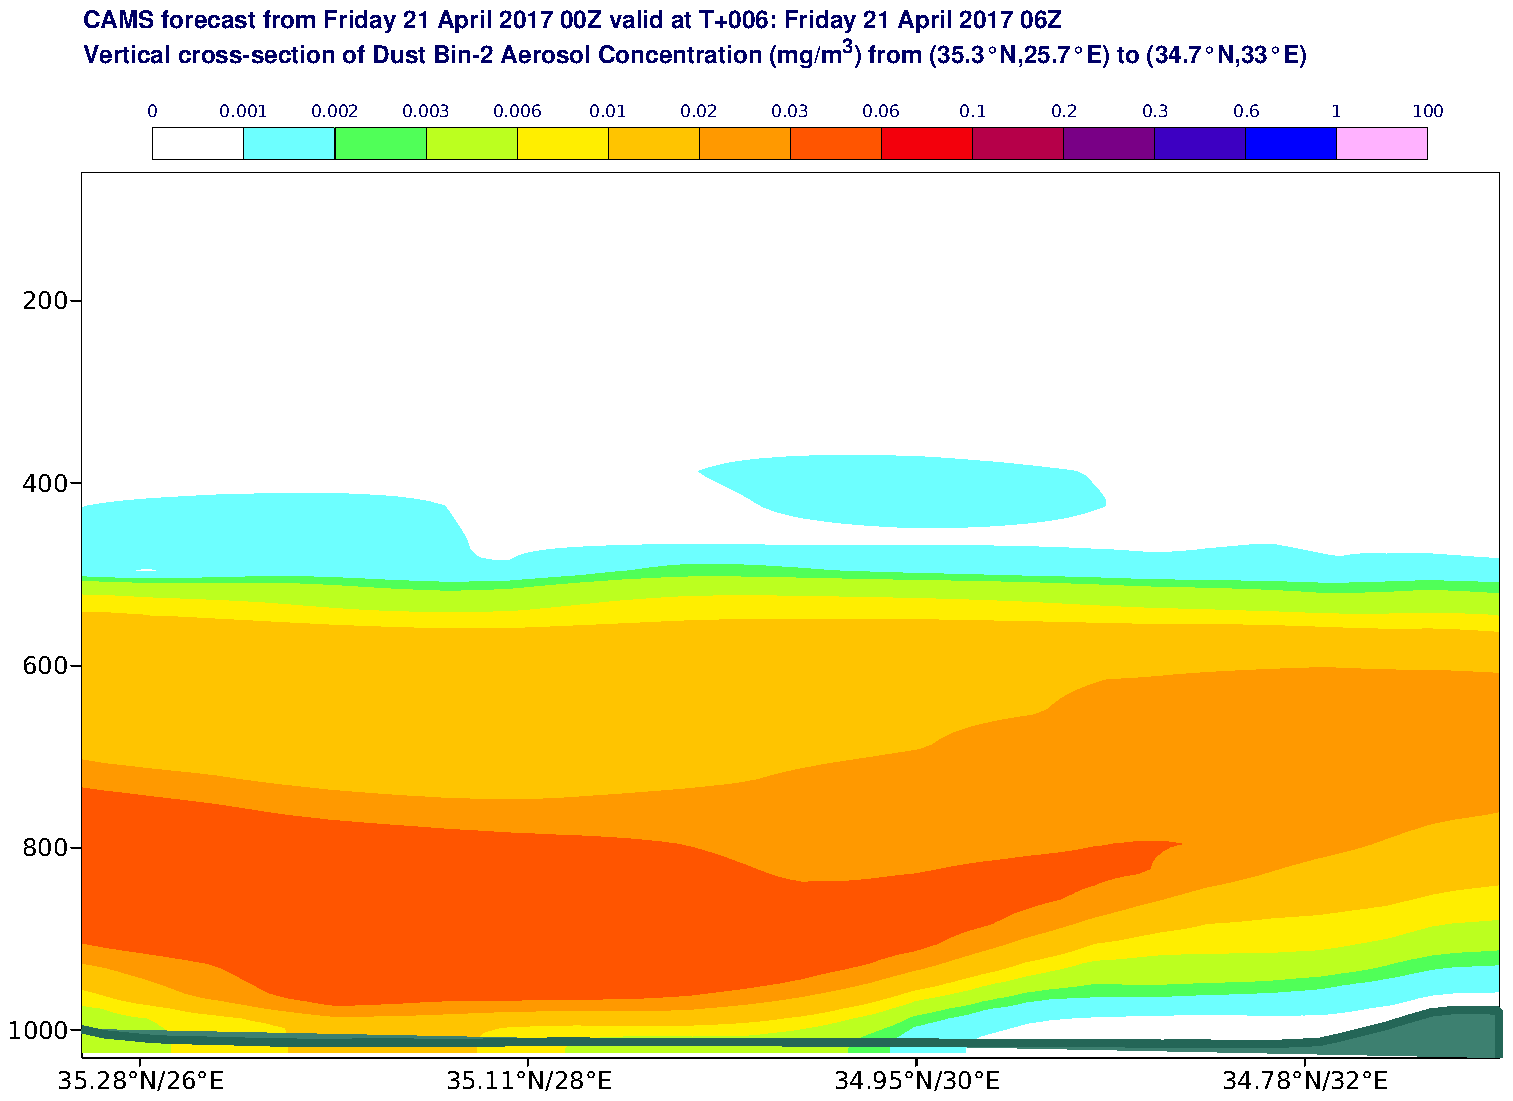 Vertical cross-section of Dust Bin-2 Aerosol Concentration (mg/m3) valid at T6 - 2017-04-21 06:00